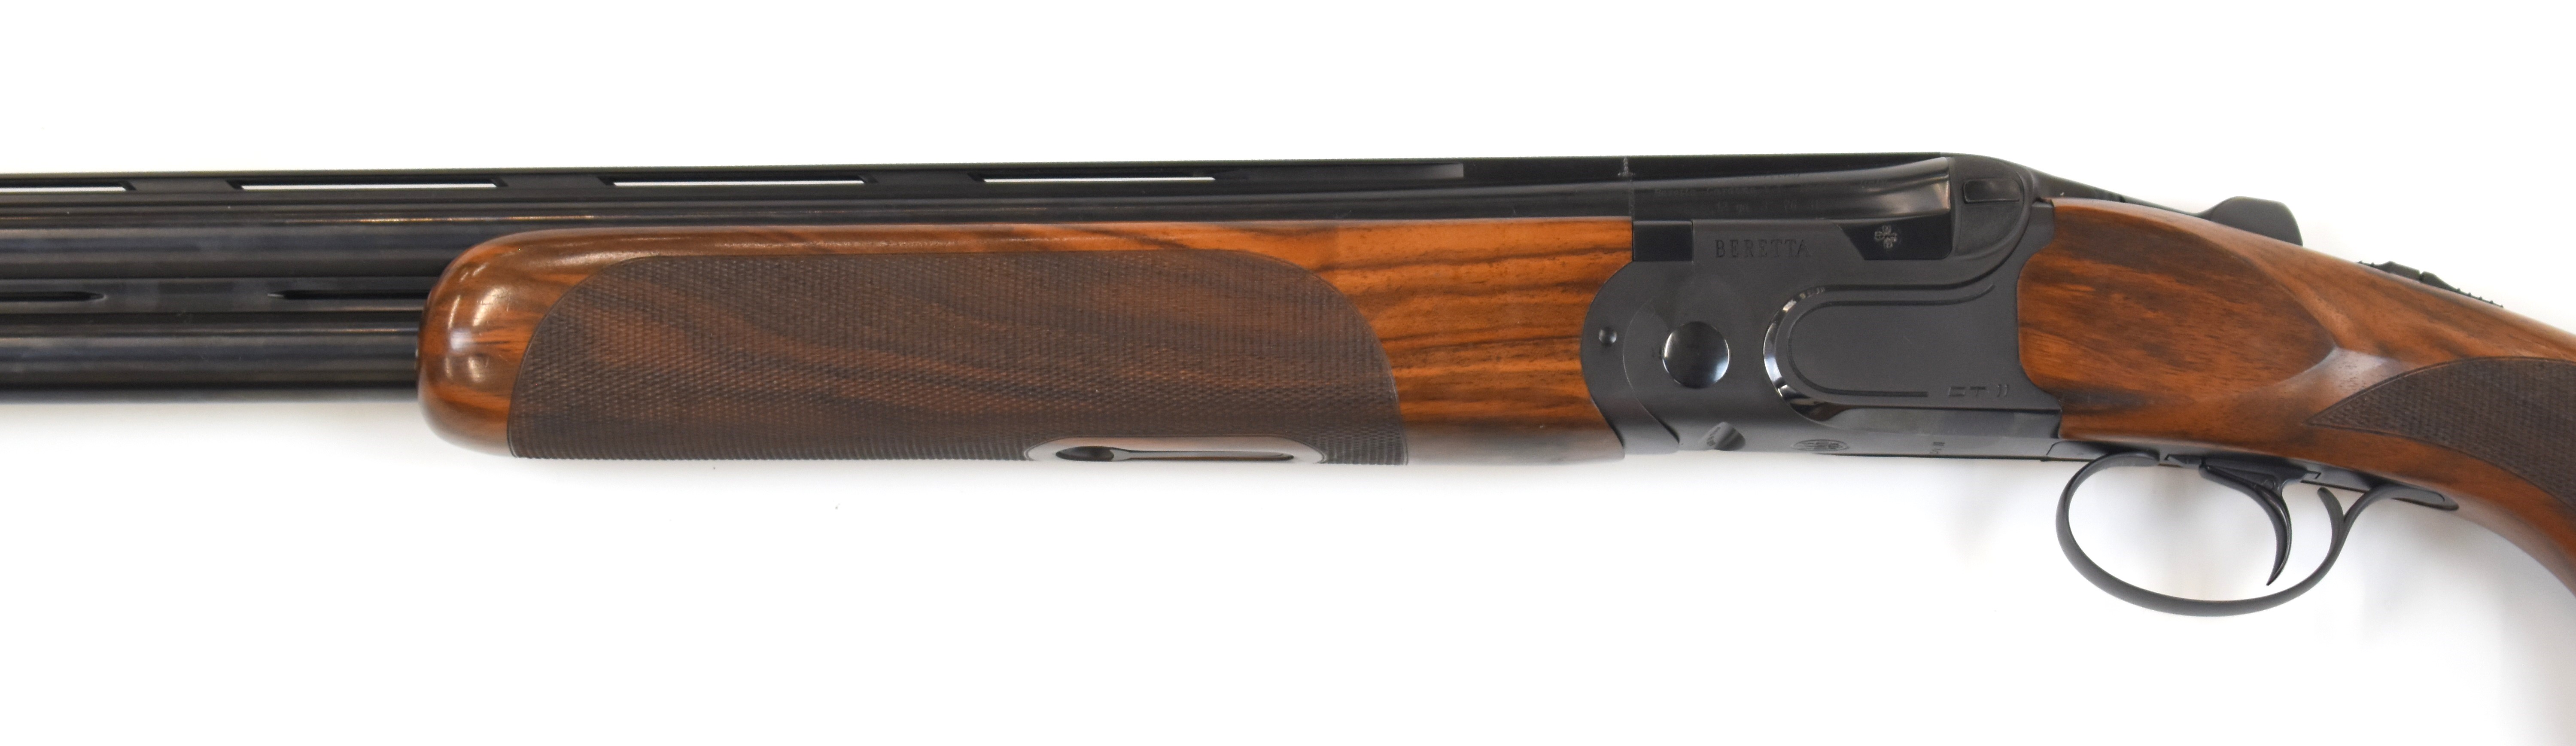 Beretta DT11 Sporting GMK 50th Anniversary Special Edition 12 bore over and under ejector shotgun - Image 9 of 13